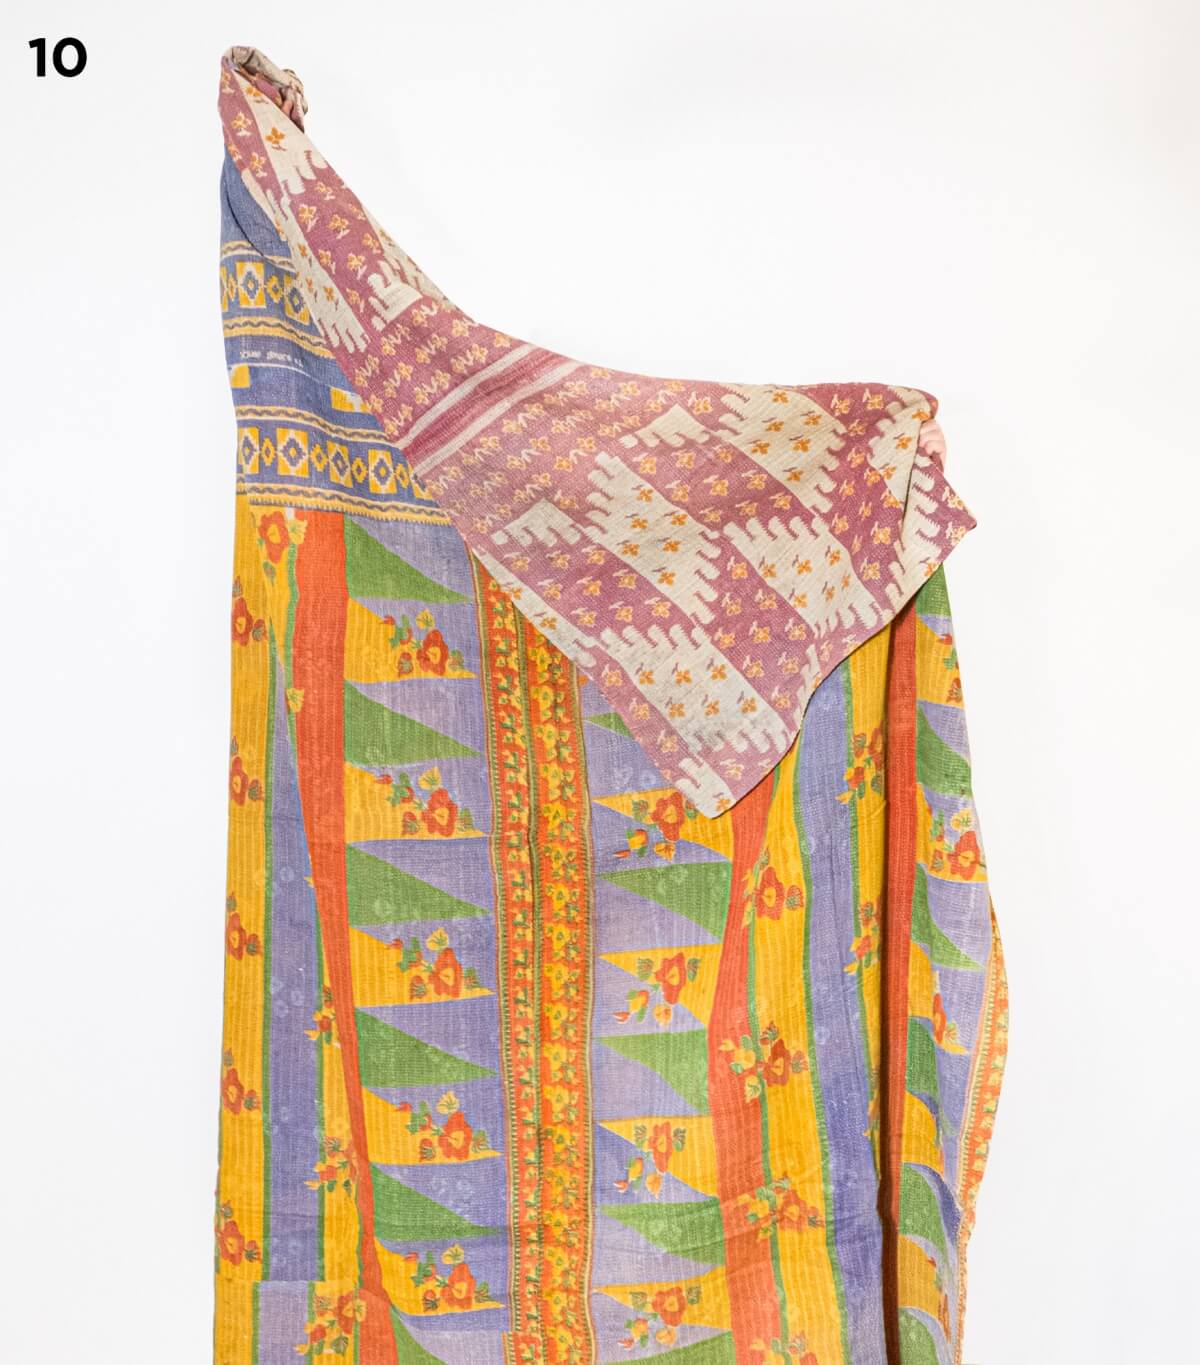 Cotton indian Kantha - 63x98 inches